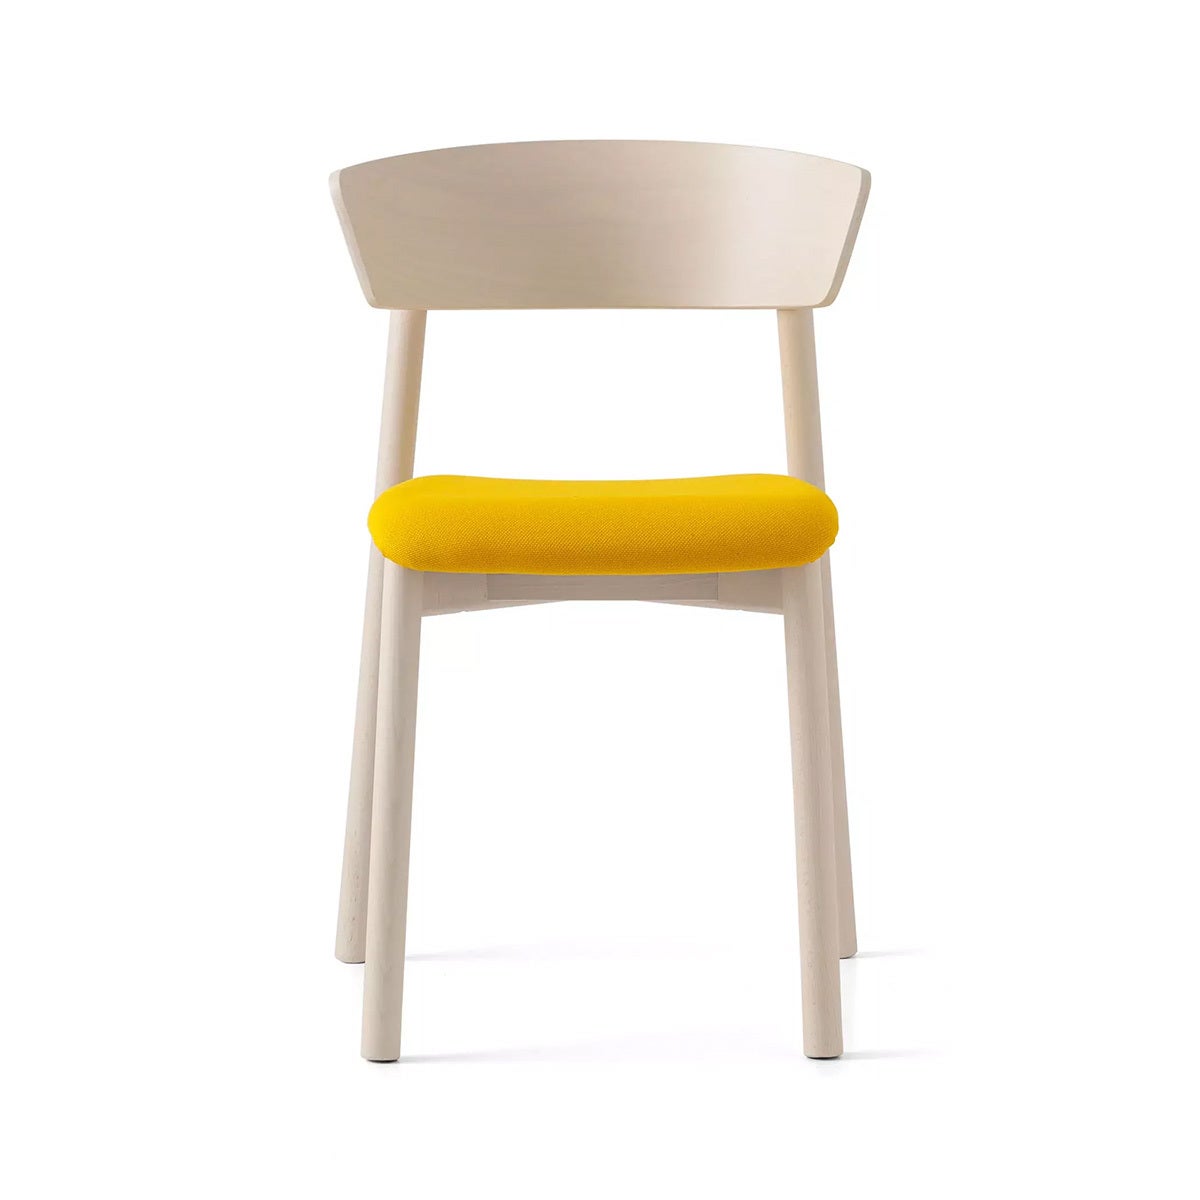 Clelia Upholstered Chair with yellow seat